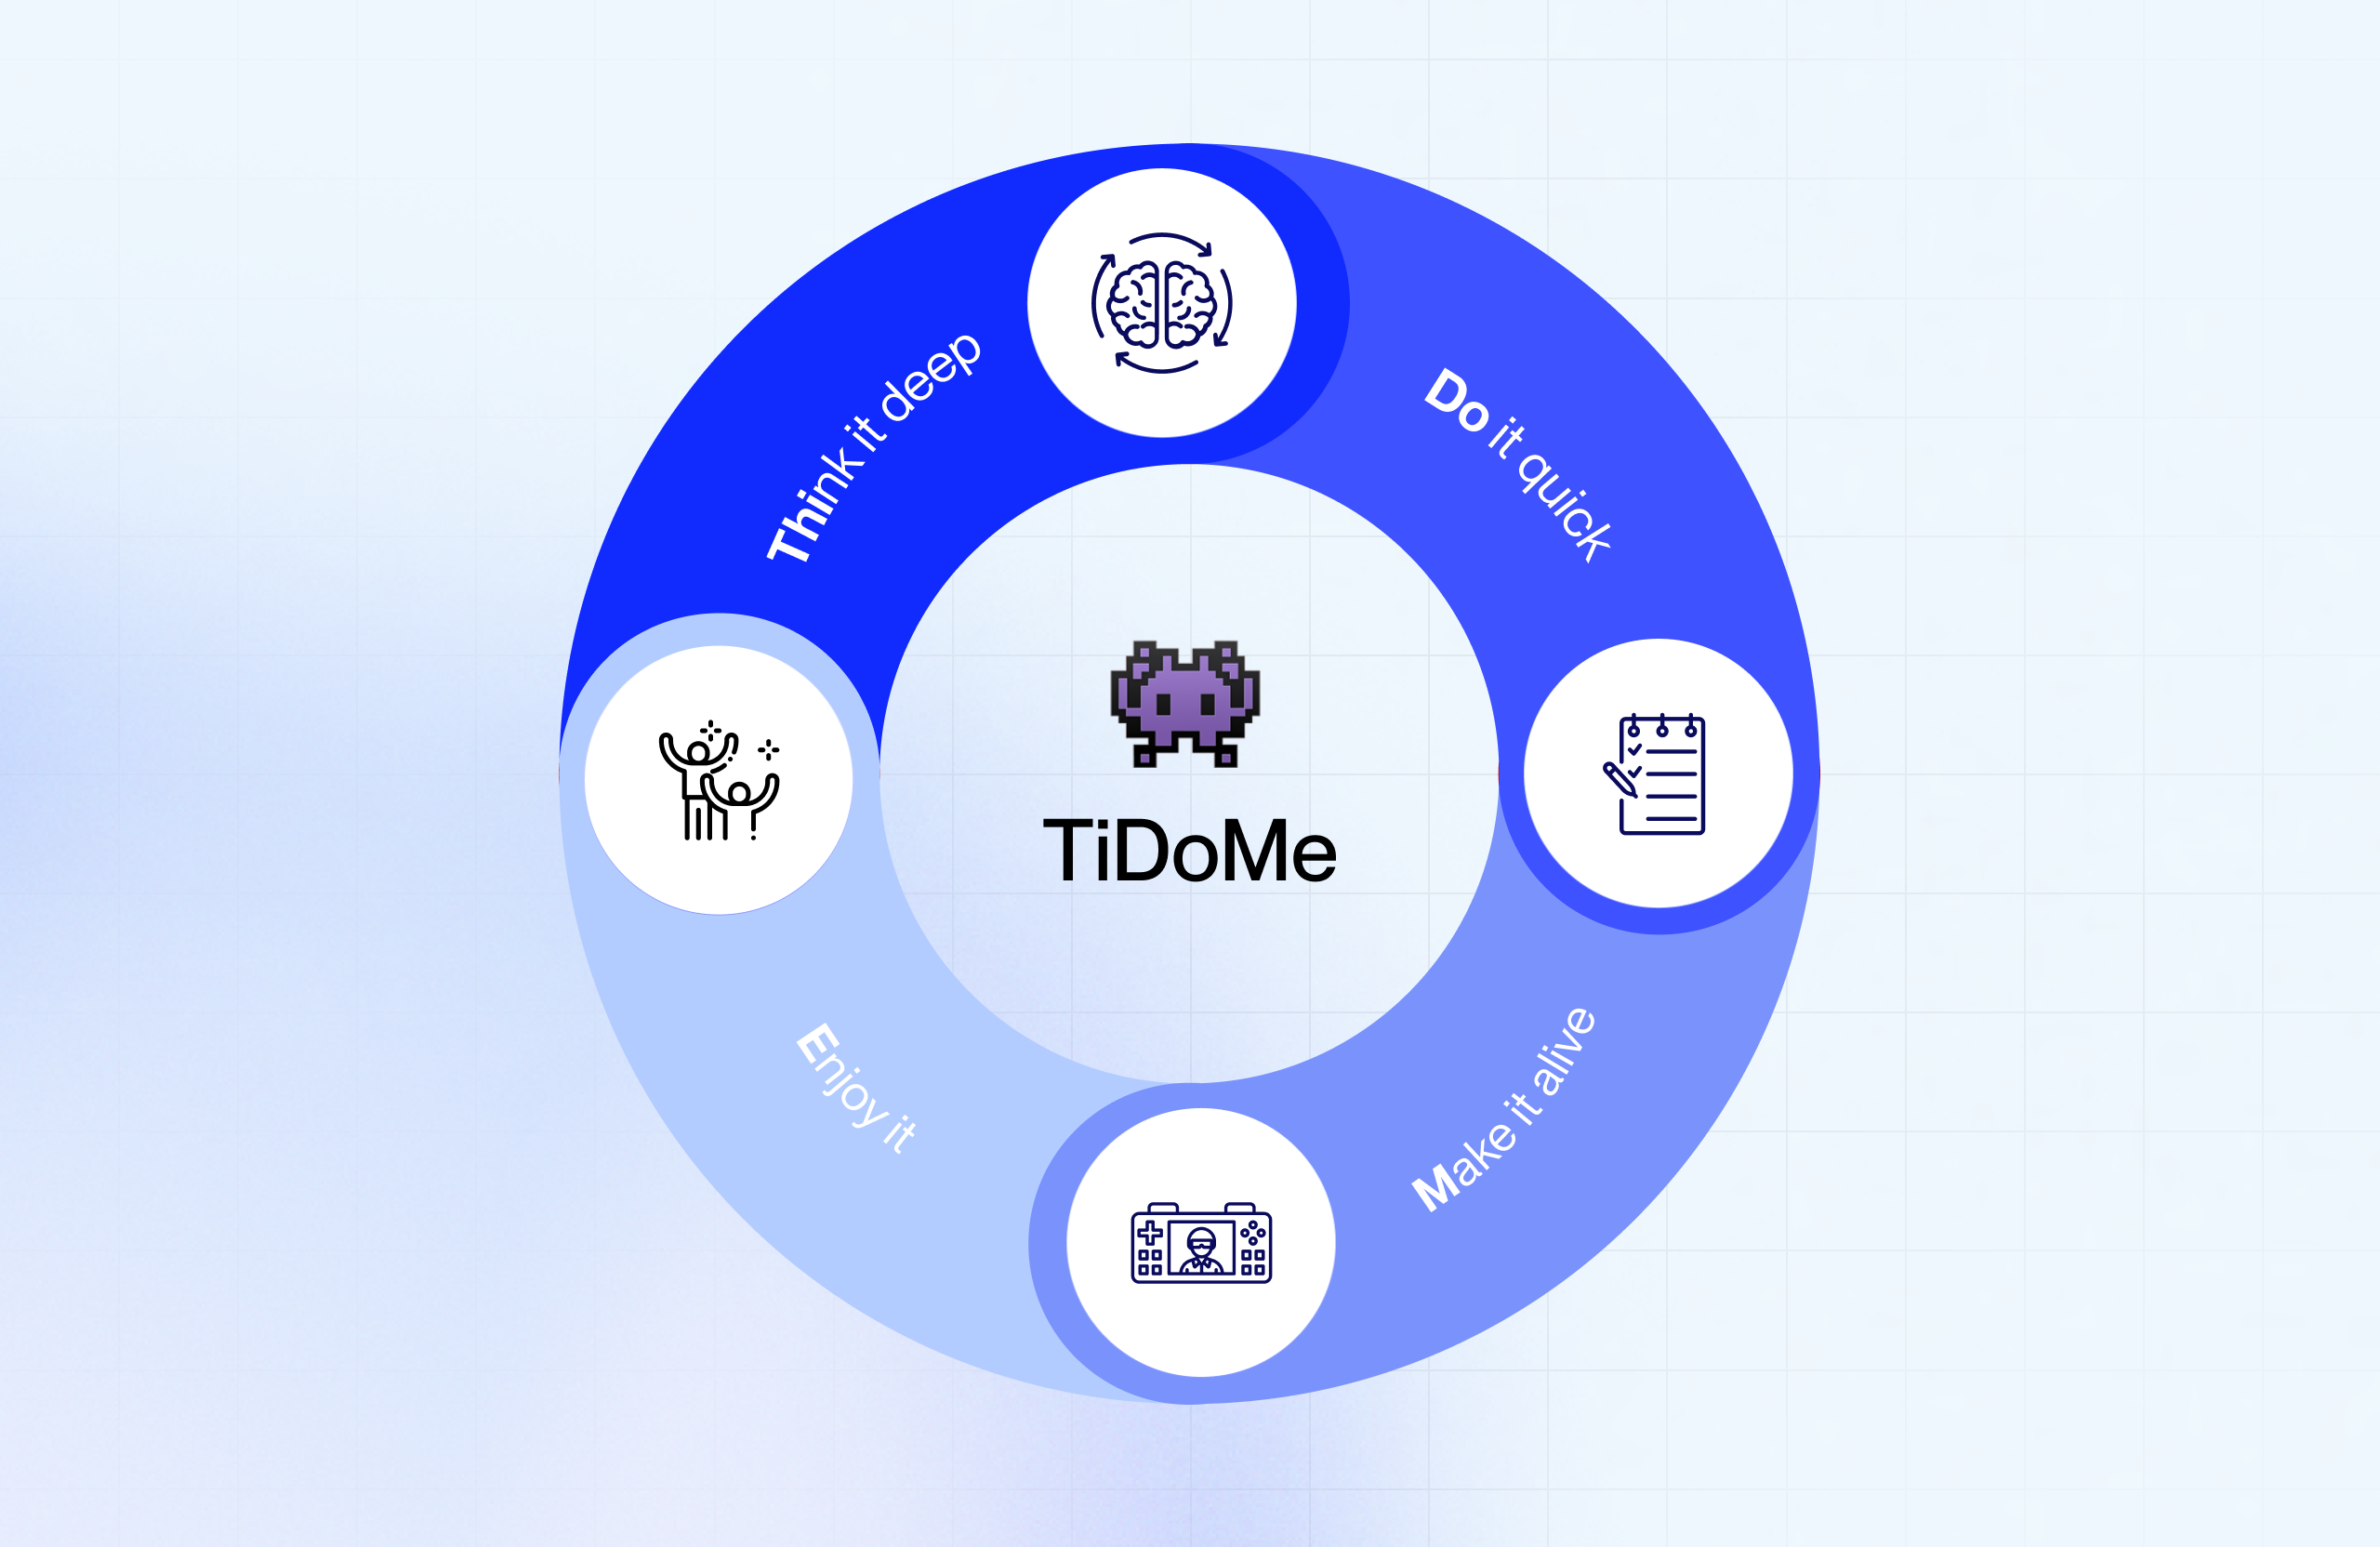 The "TiDoME" concept is perfect for a successful gamification strategy for your mobile application!